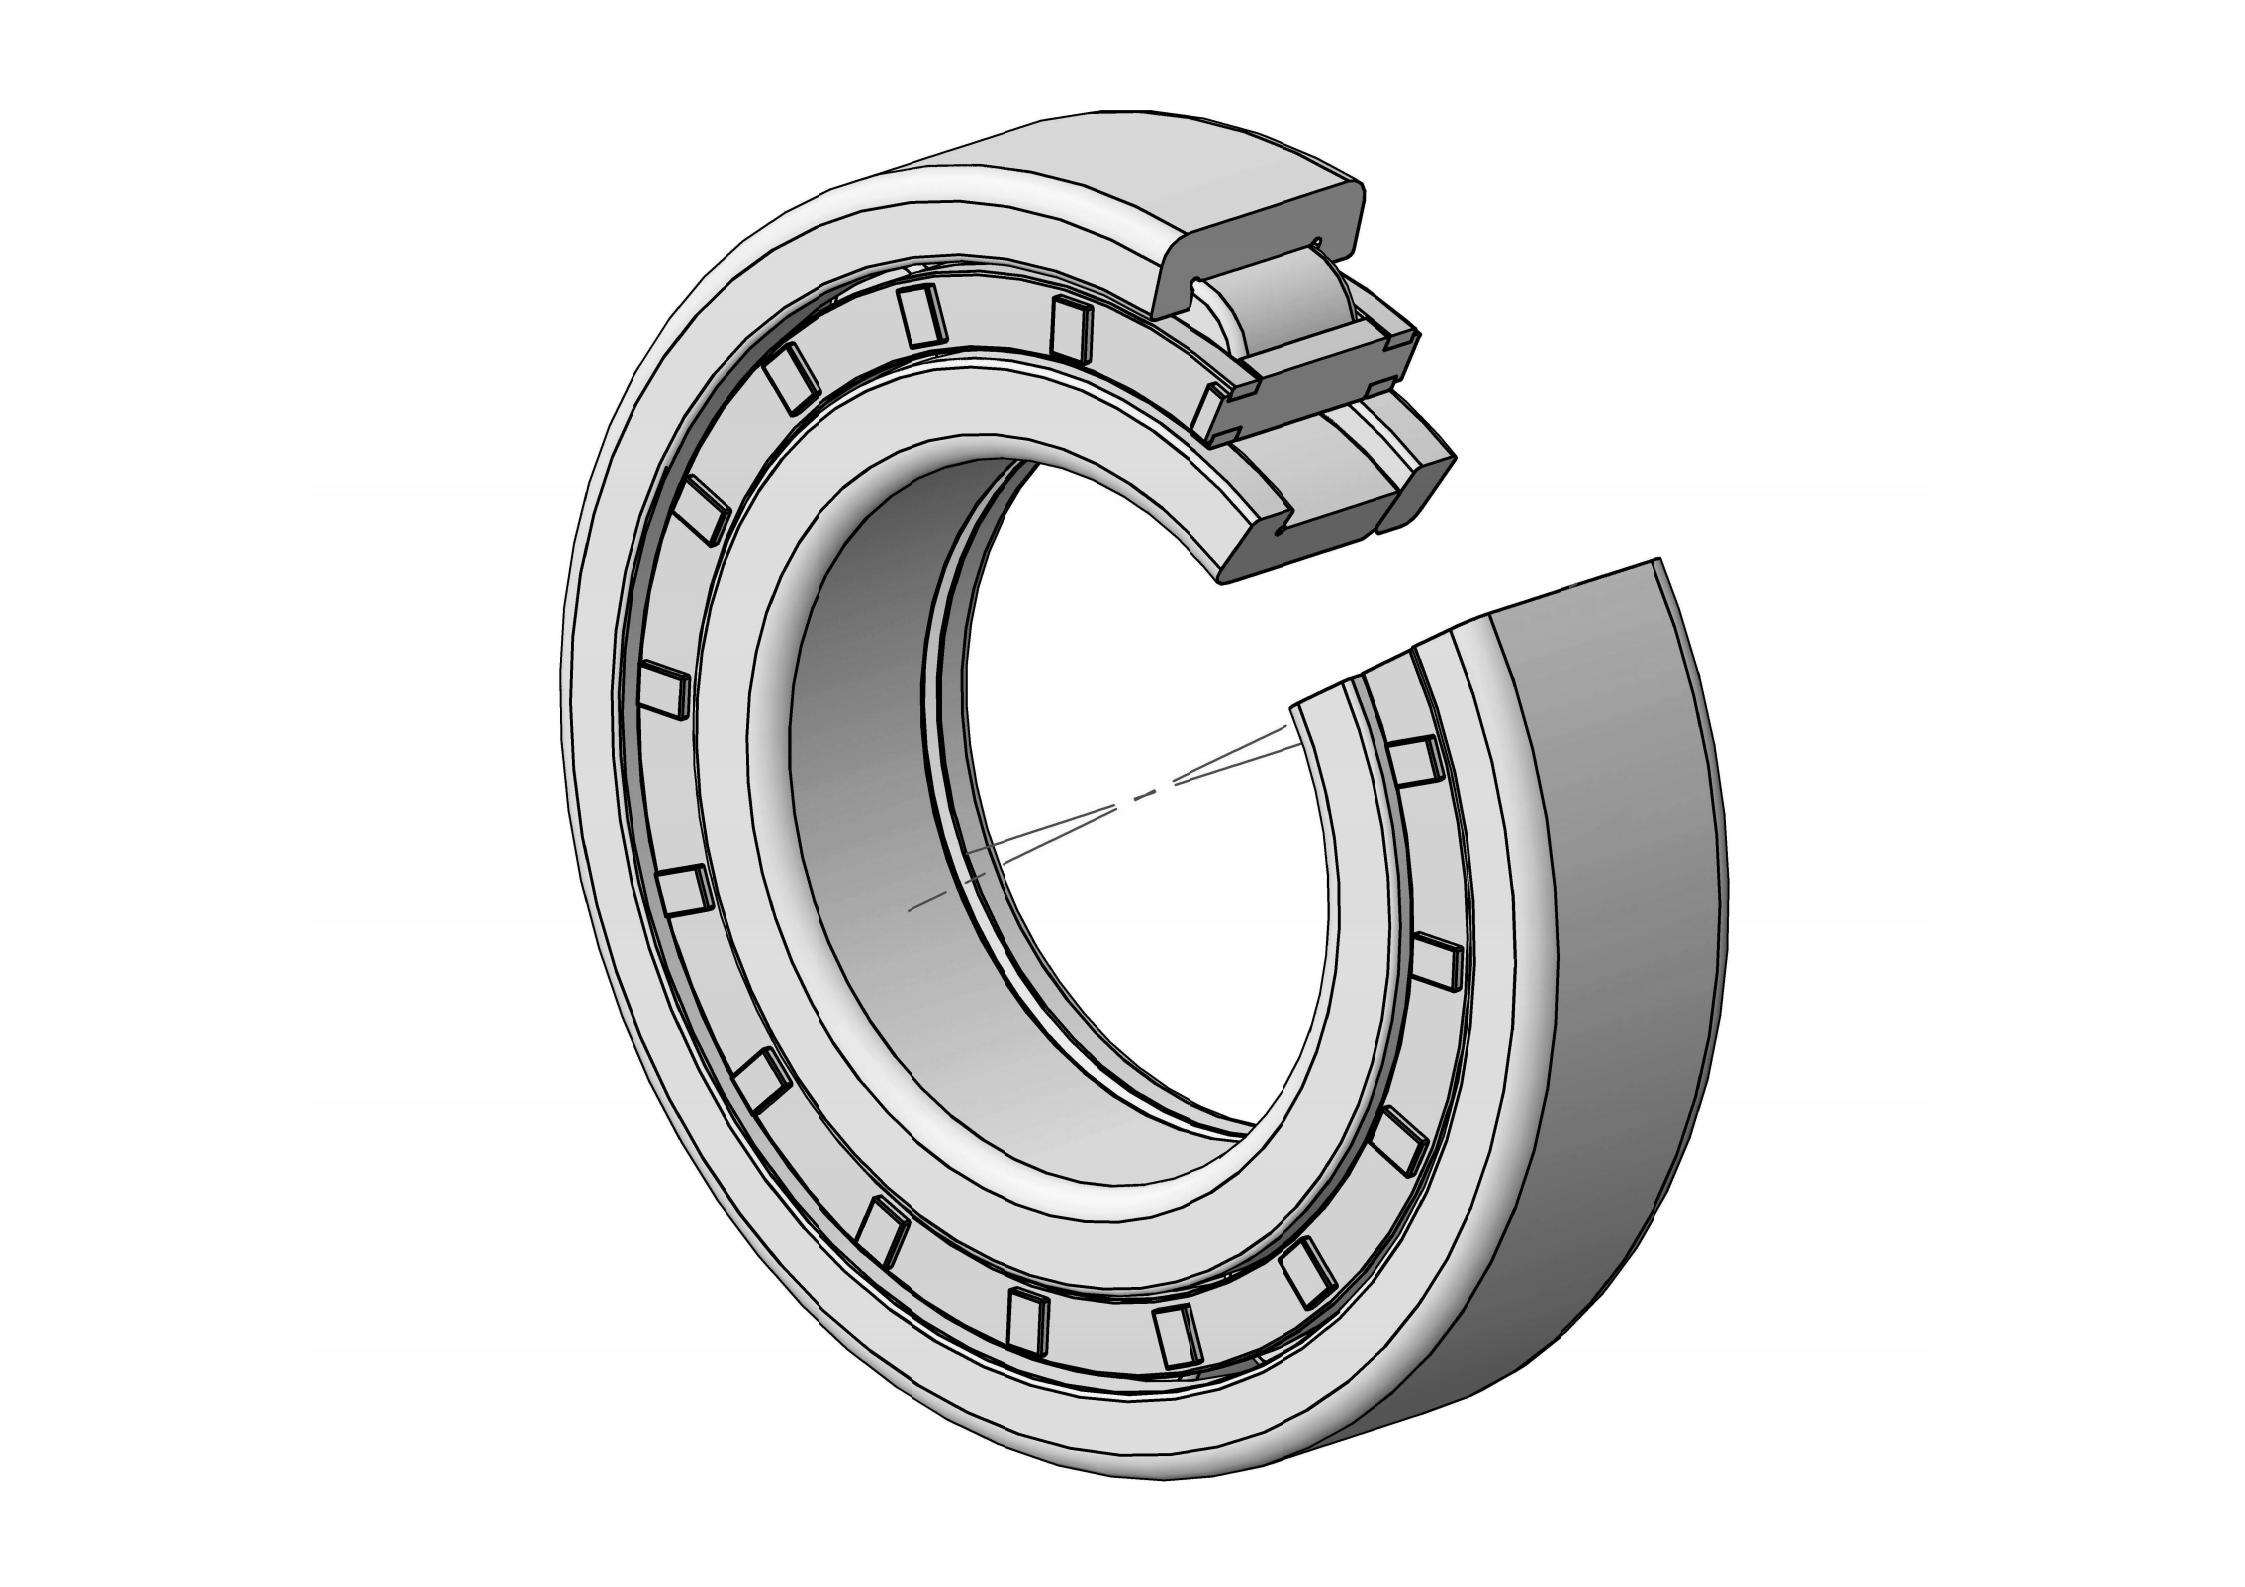 NUP2222-EM Single Row Cylindrical roller bearing